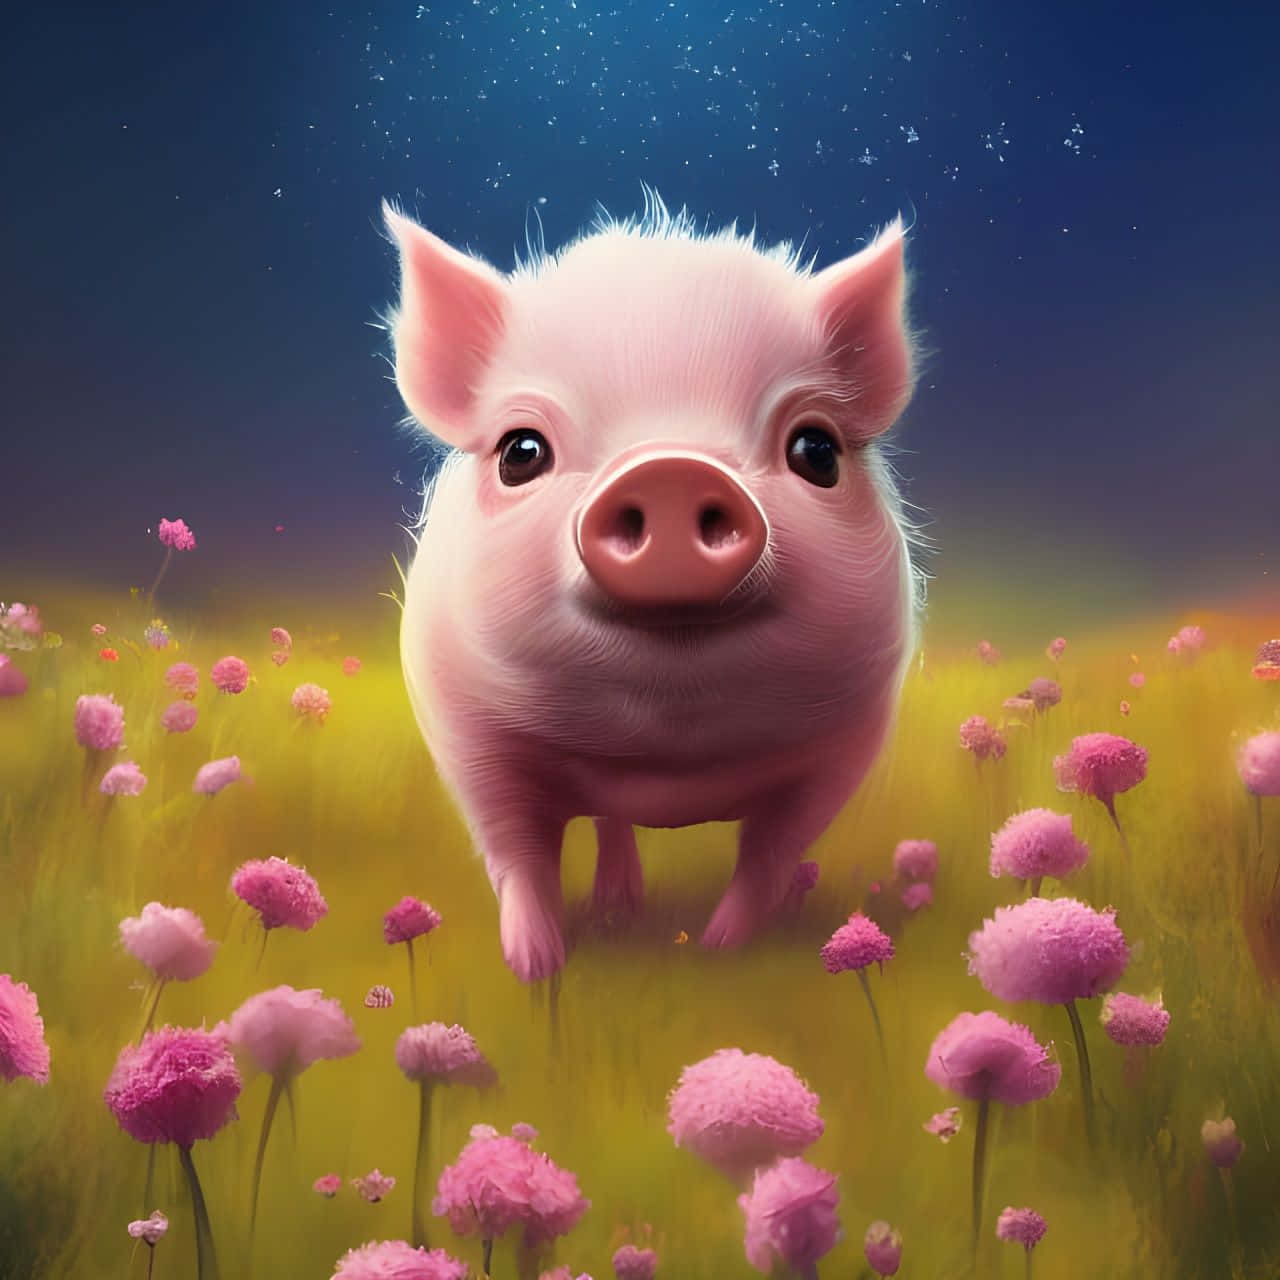 This adorable piglet is all smiles!